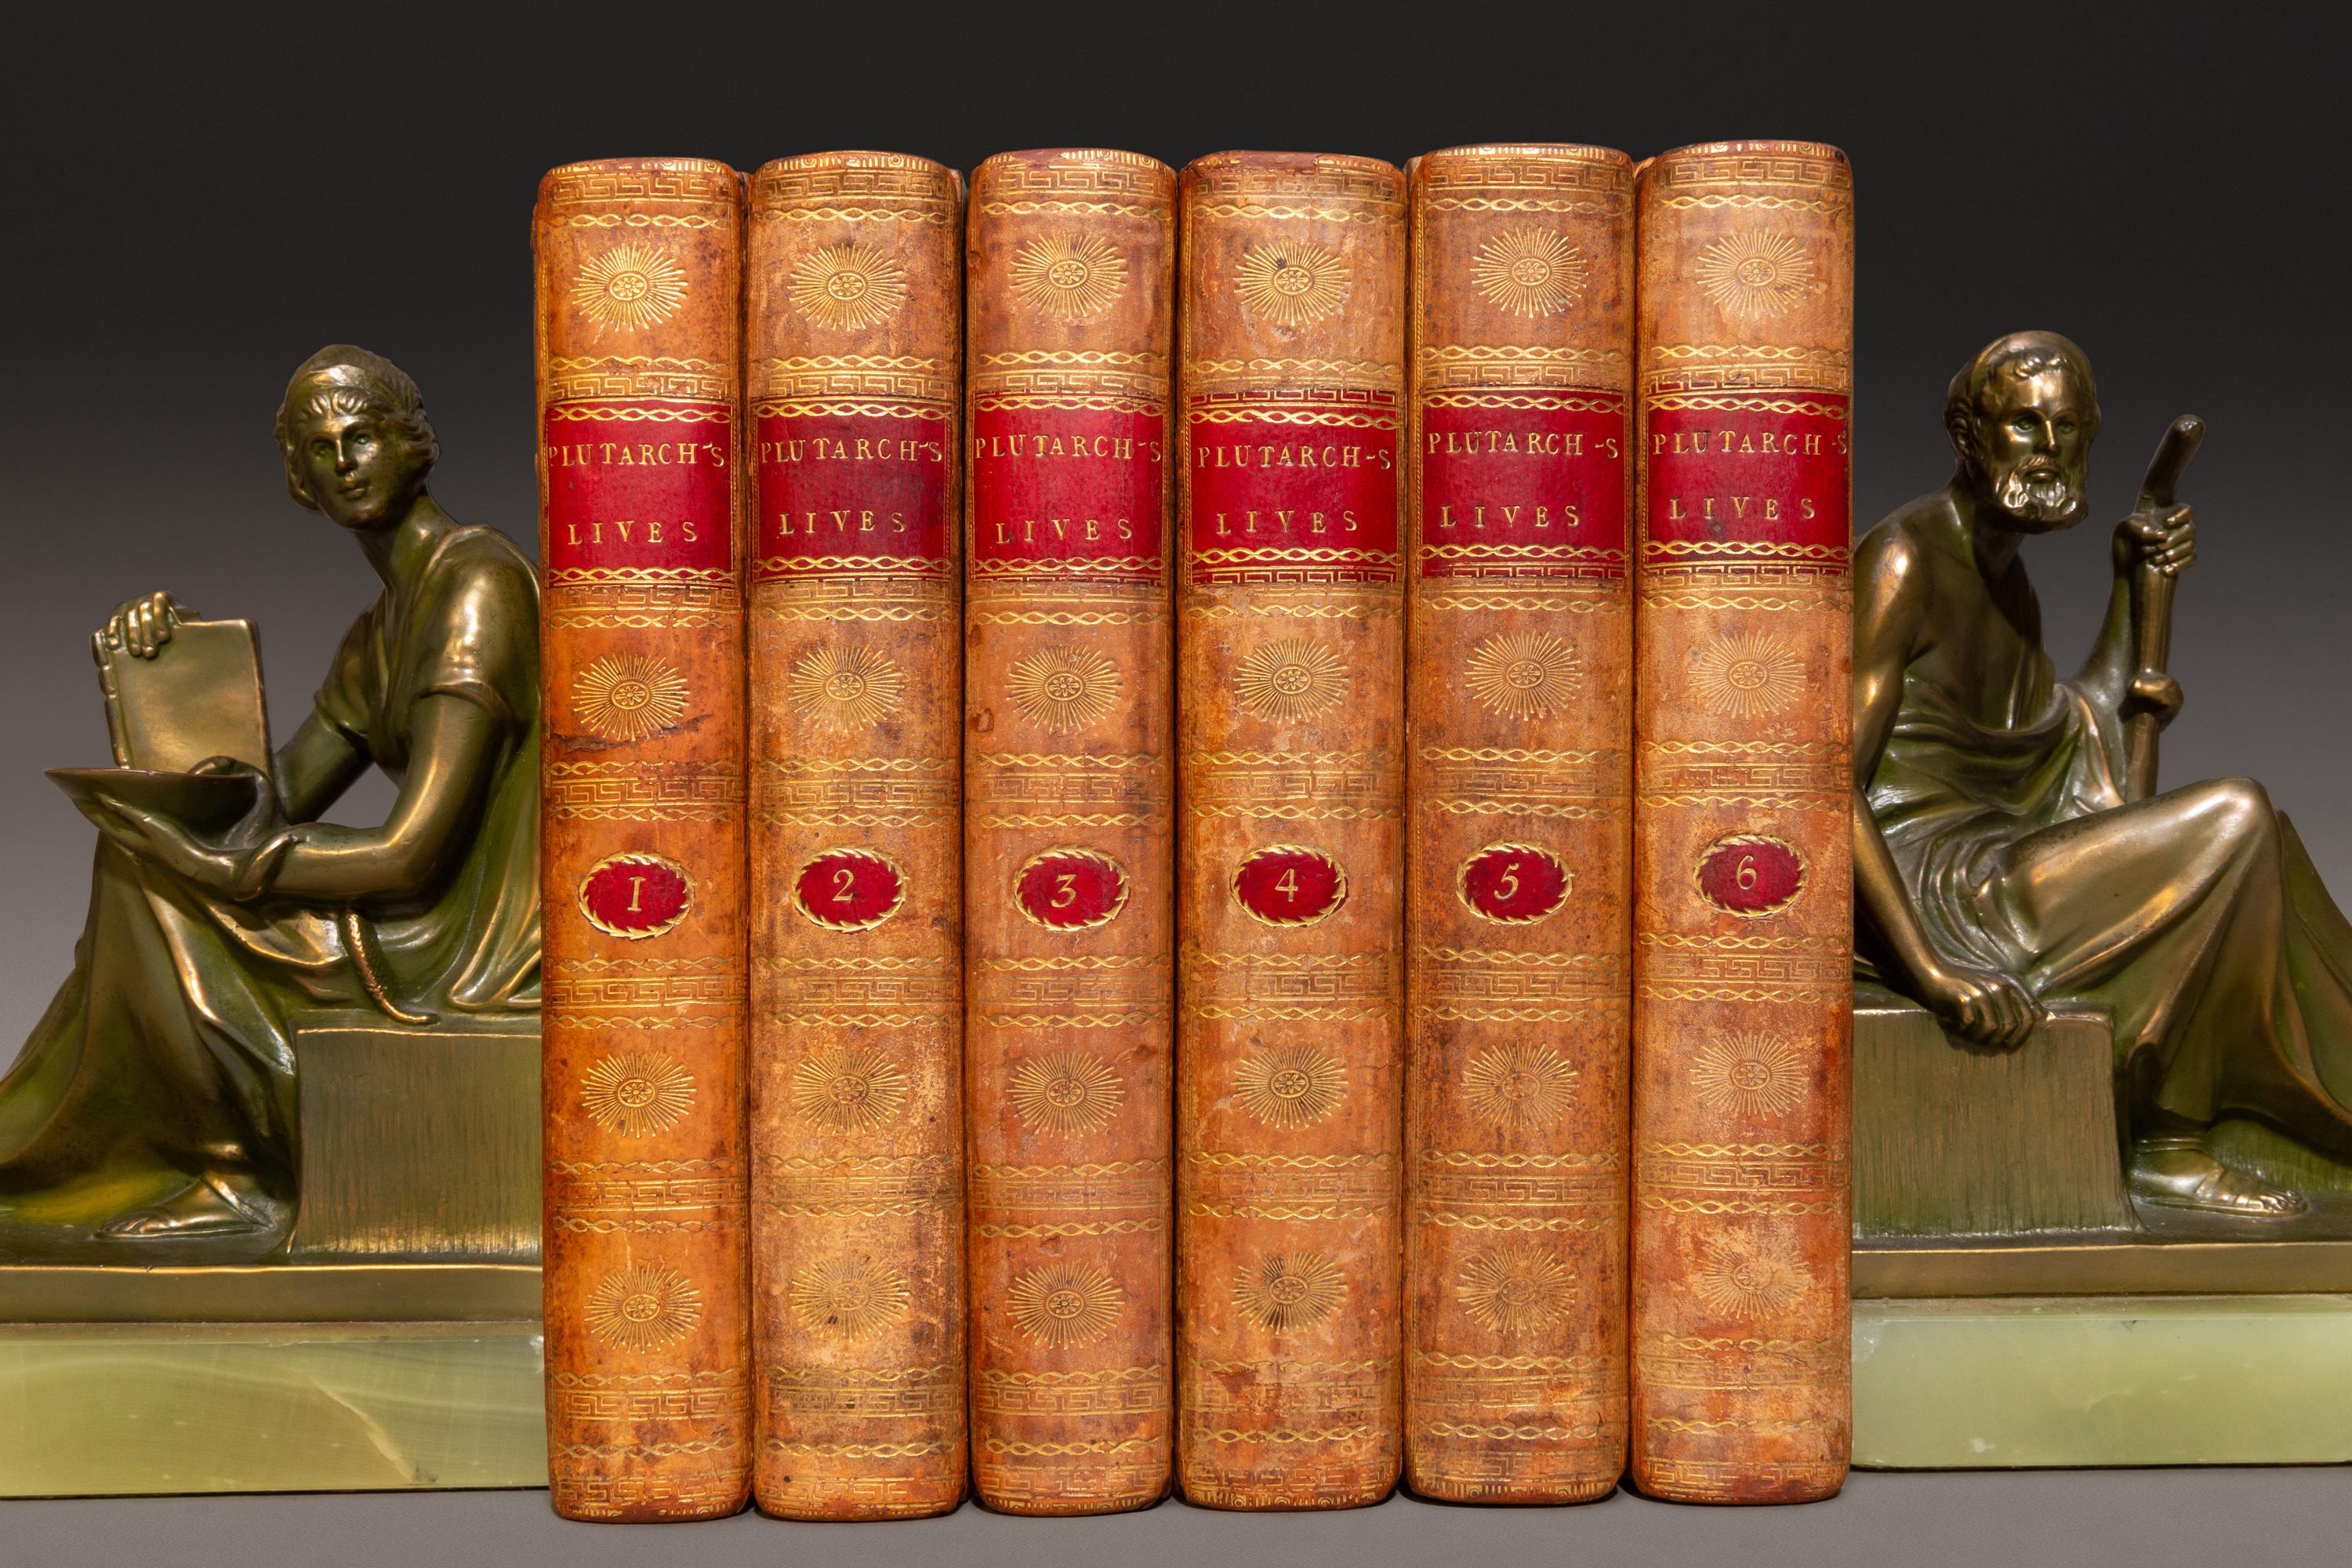 6 Volumes. Plutarch's Lives edited by John Langhorne & William Langhorne. Bound in full contemporary tan calf, gilt on spines, red labels, frontispieces. Published: London: T. Longman 1795.